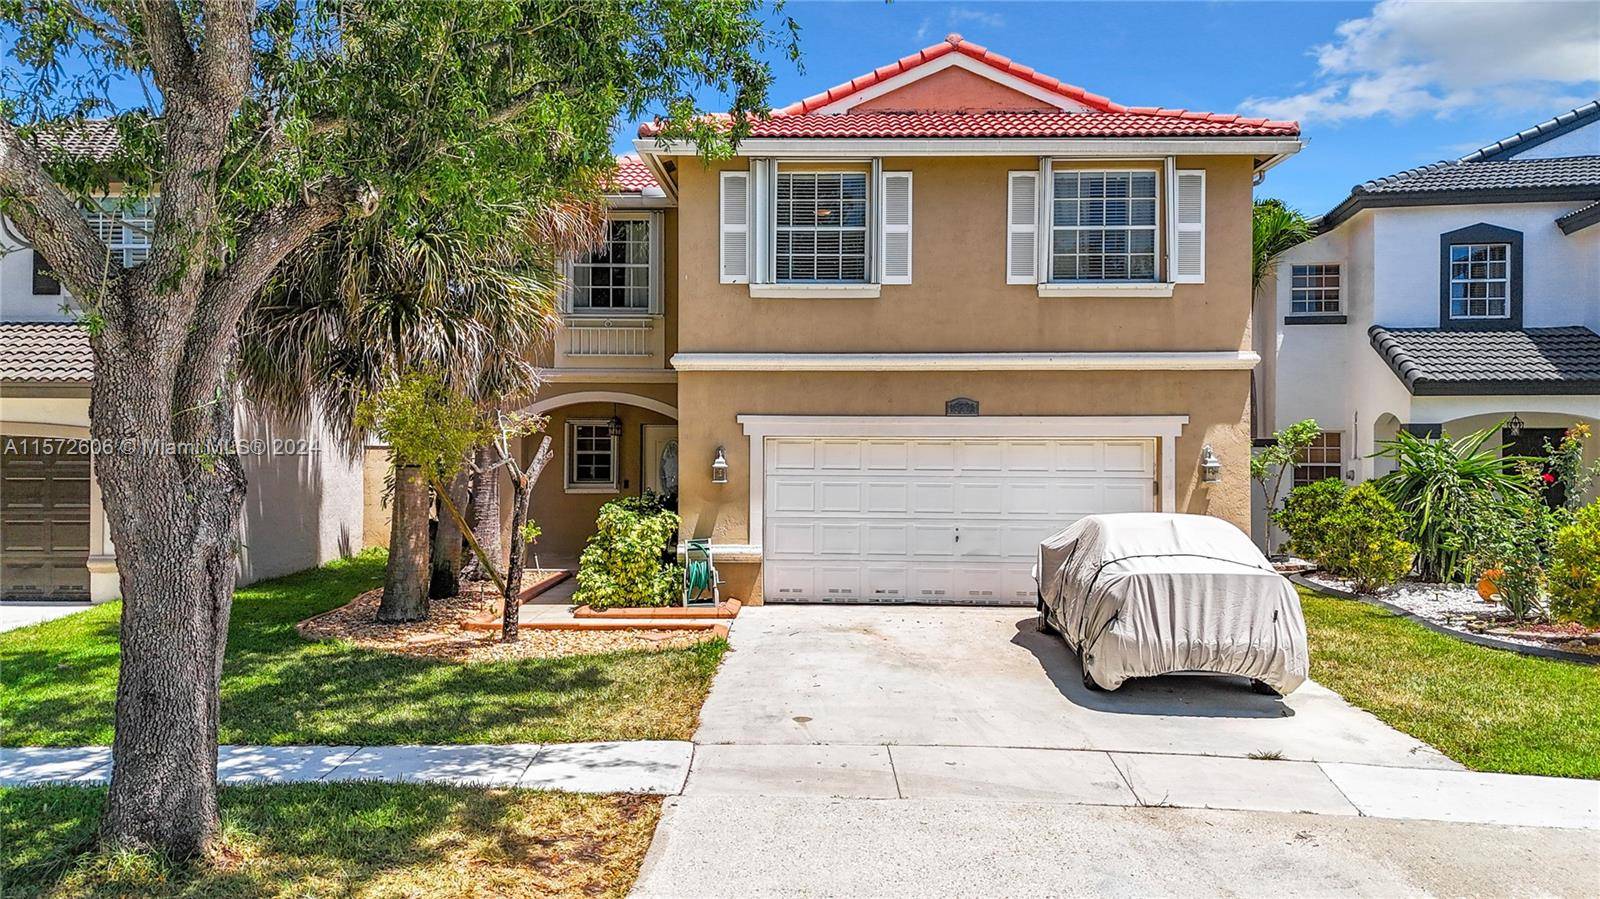 Elegant and spacious 2 story home located in the highly sought after Huntington community which provides top convenience to families looking to be close to shopping, malls, universities, and recreational ...